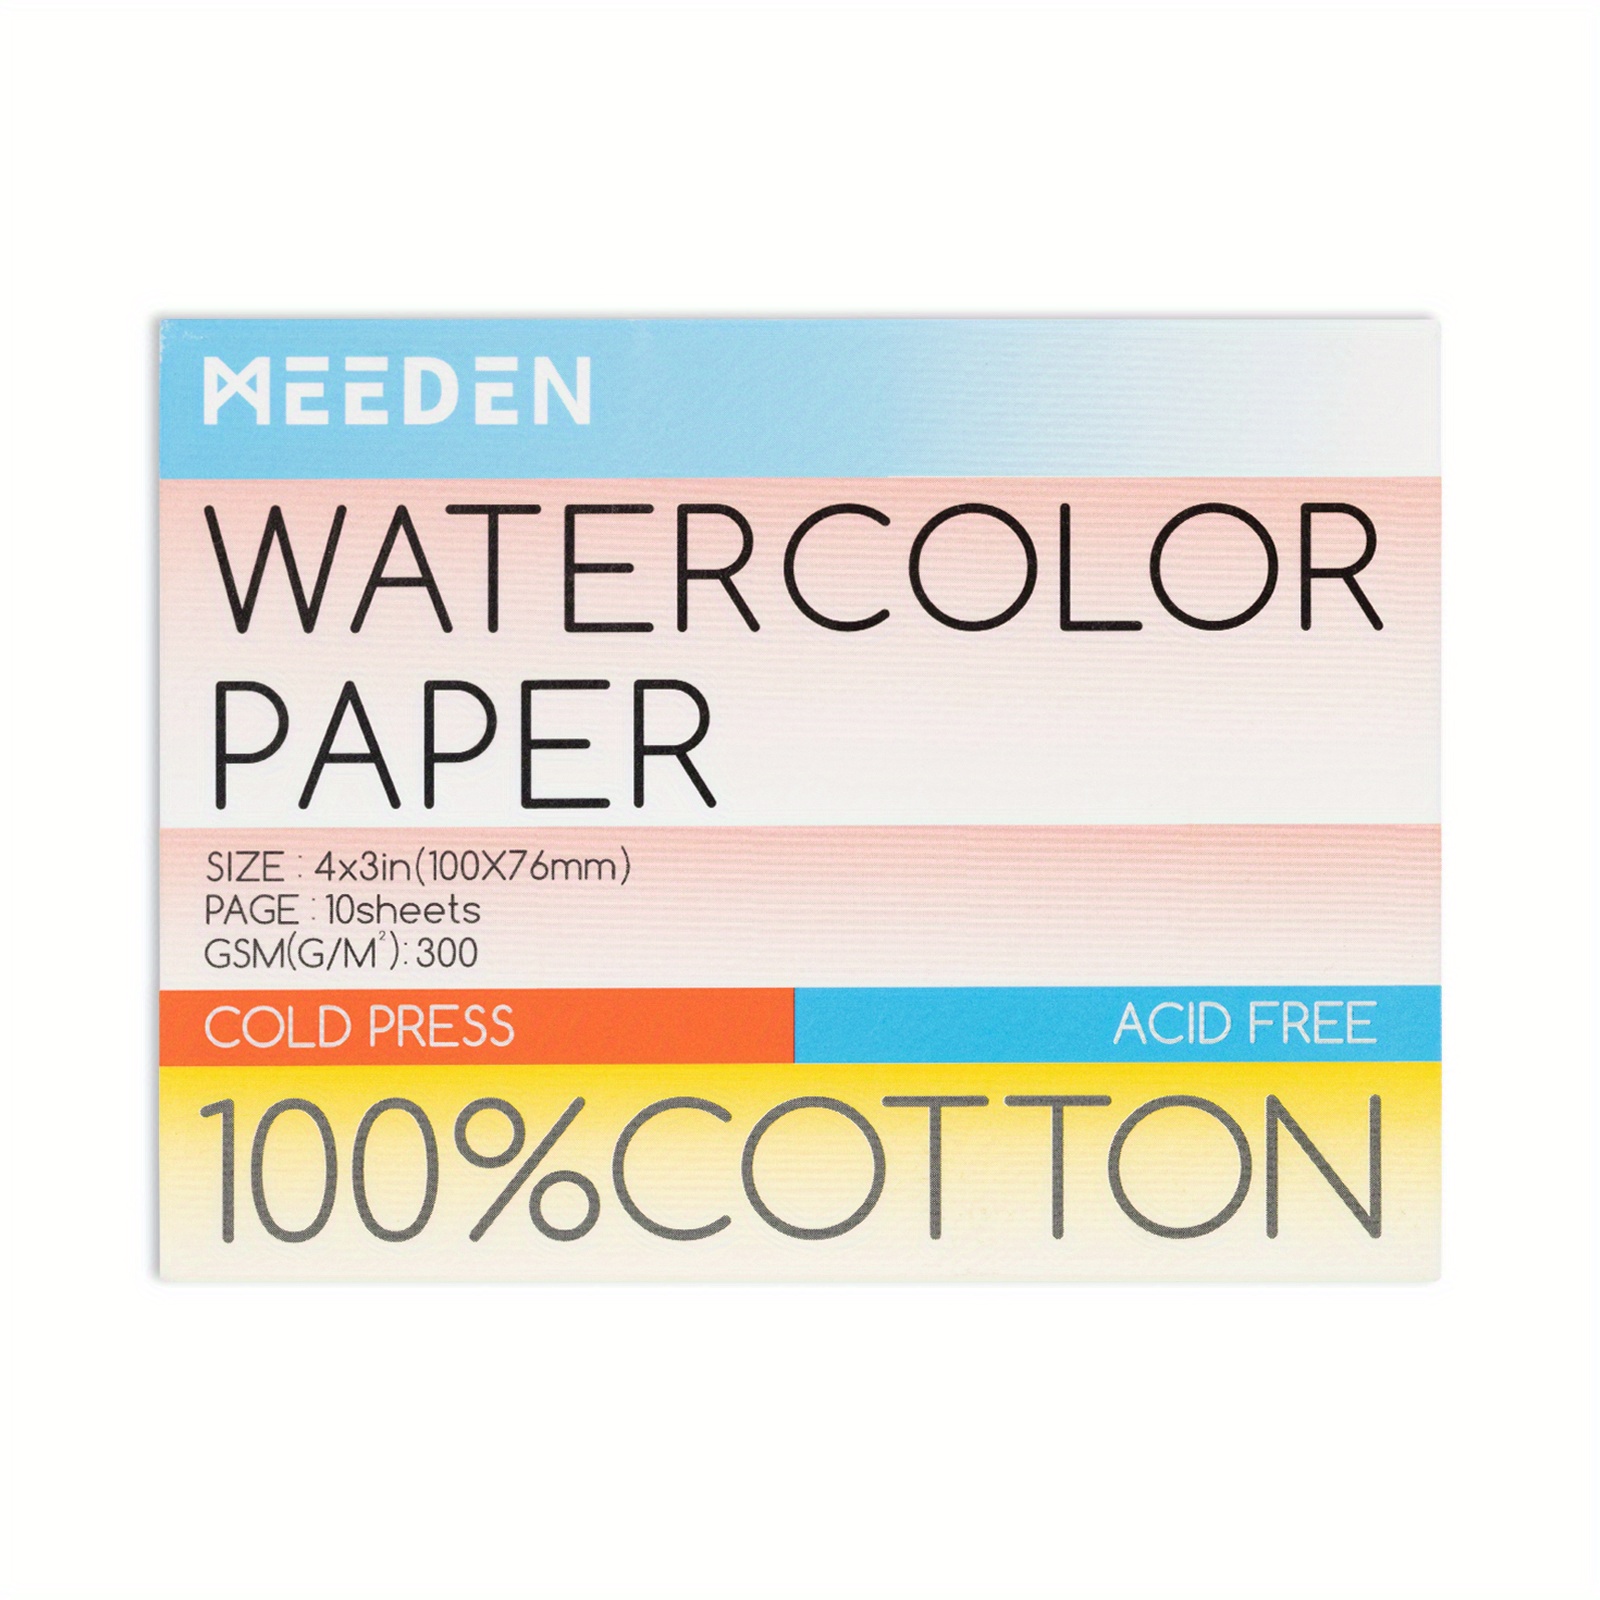 20pcs Watercolor Paper Water Color Paper 9x12 Inches 140lb/300gsm, 30  Sheets White Construction Paper Art, Paper Drawing Paper Bulk Mixed Media  Sketchbook For Drawing Water Colors Paint Adult Cotton - Toys 